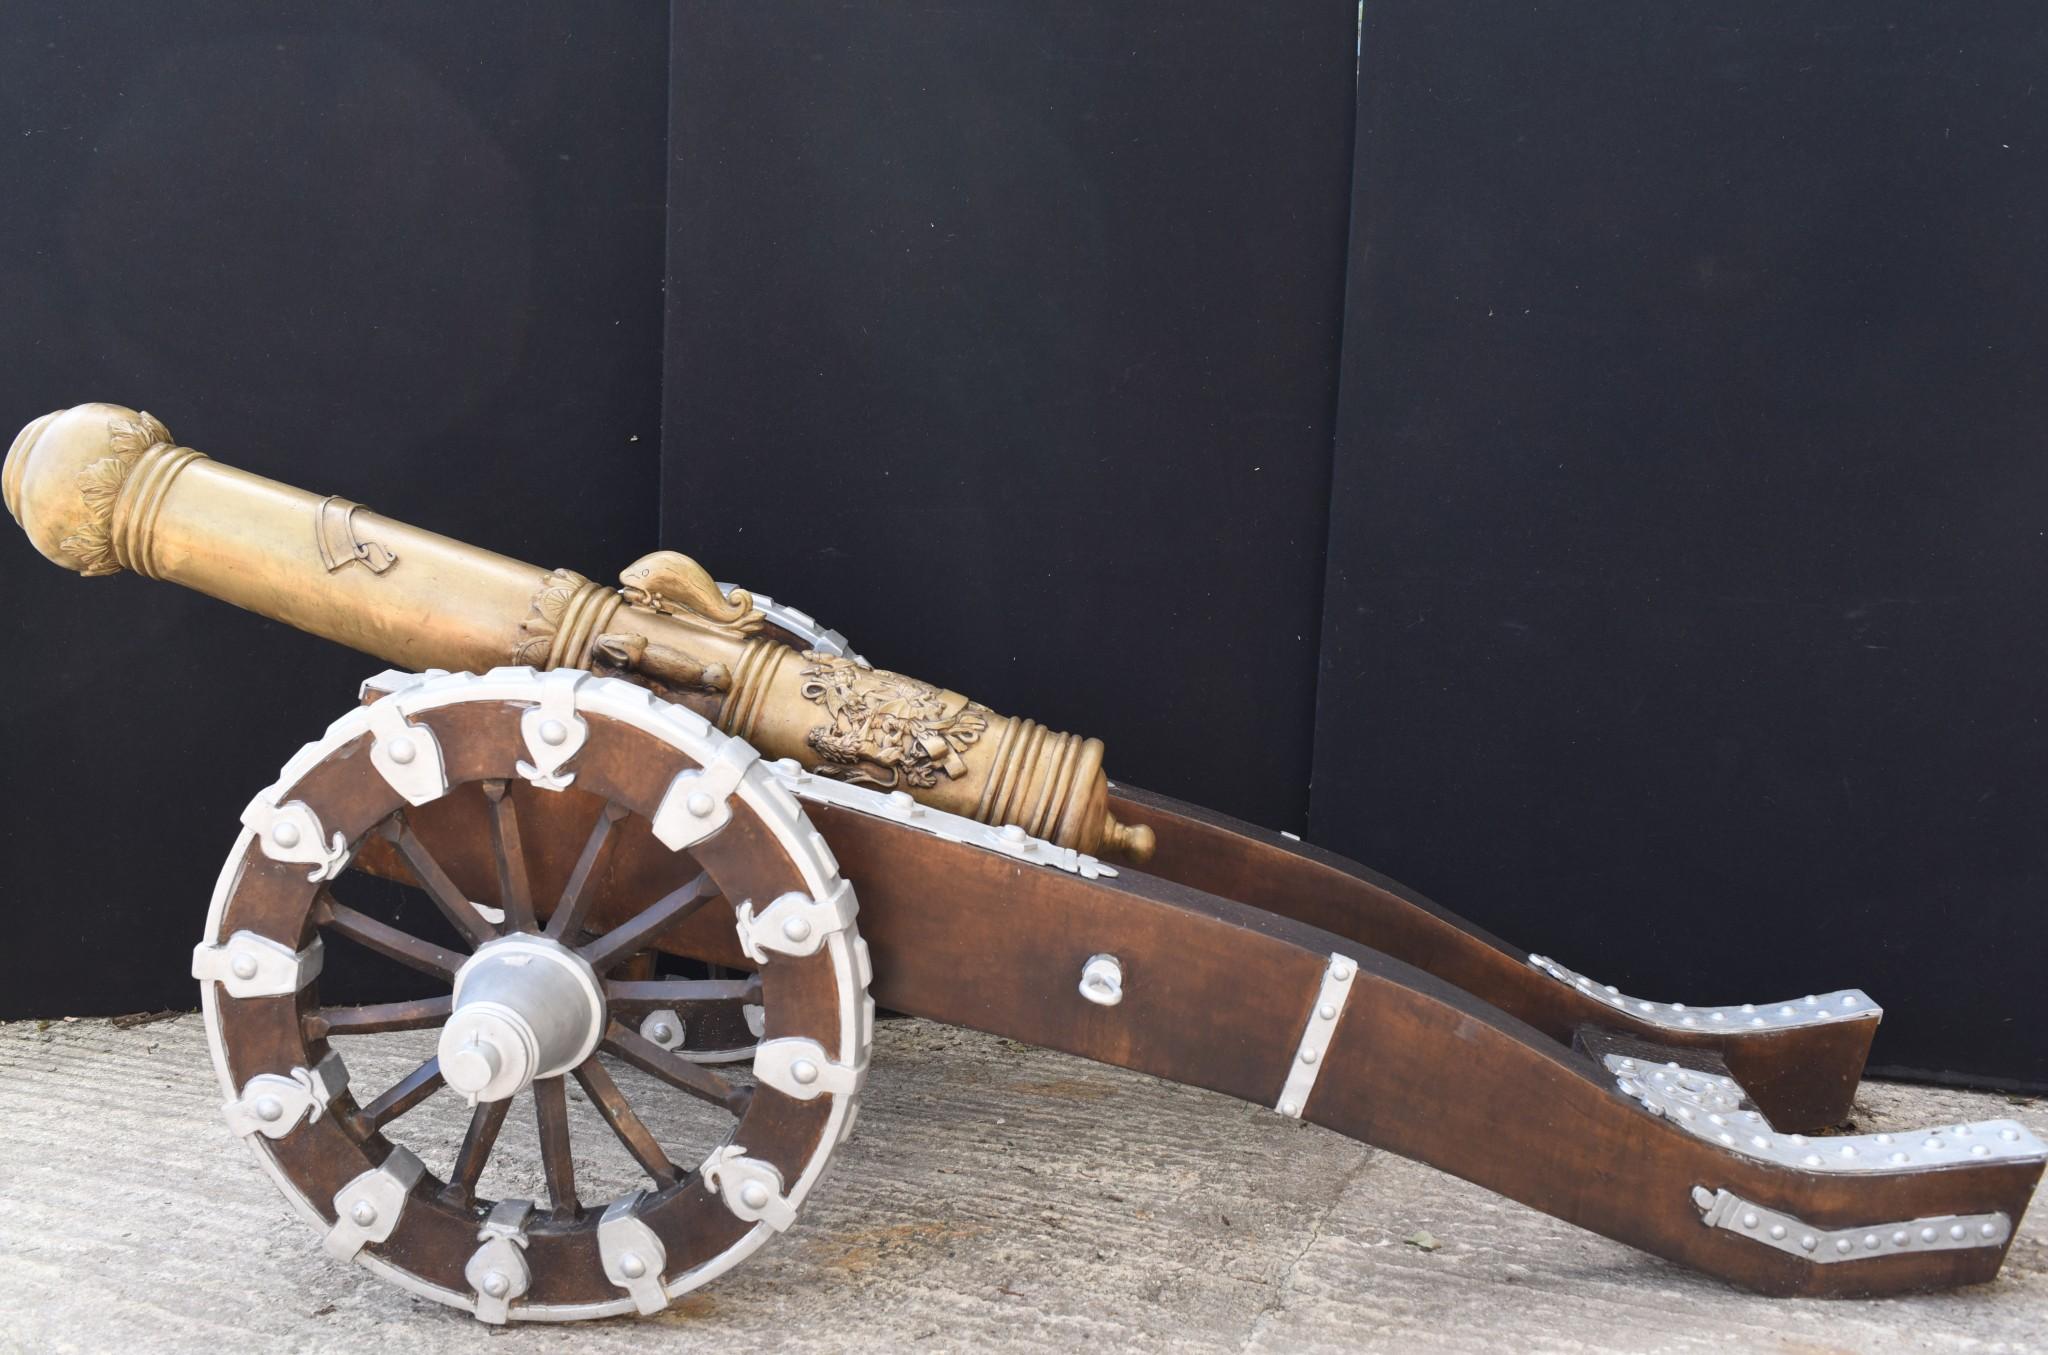 - Impressive pair of large French bronze cannons 
- Great for a garden or business
- Of course being bronze these can live outside with no fear of rusting
- Viewings available by appointment
- Offered in great shape ready for home use right away.